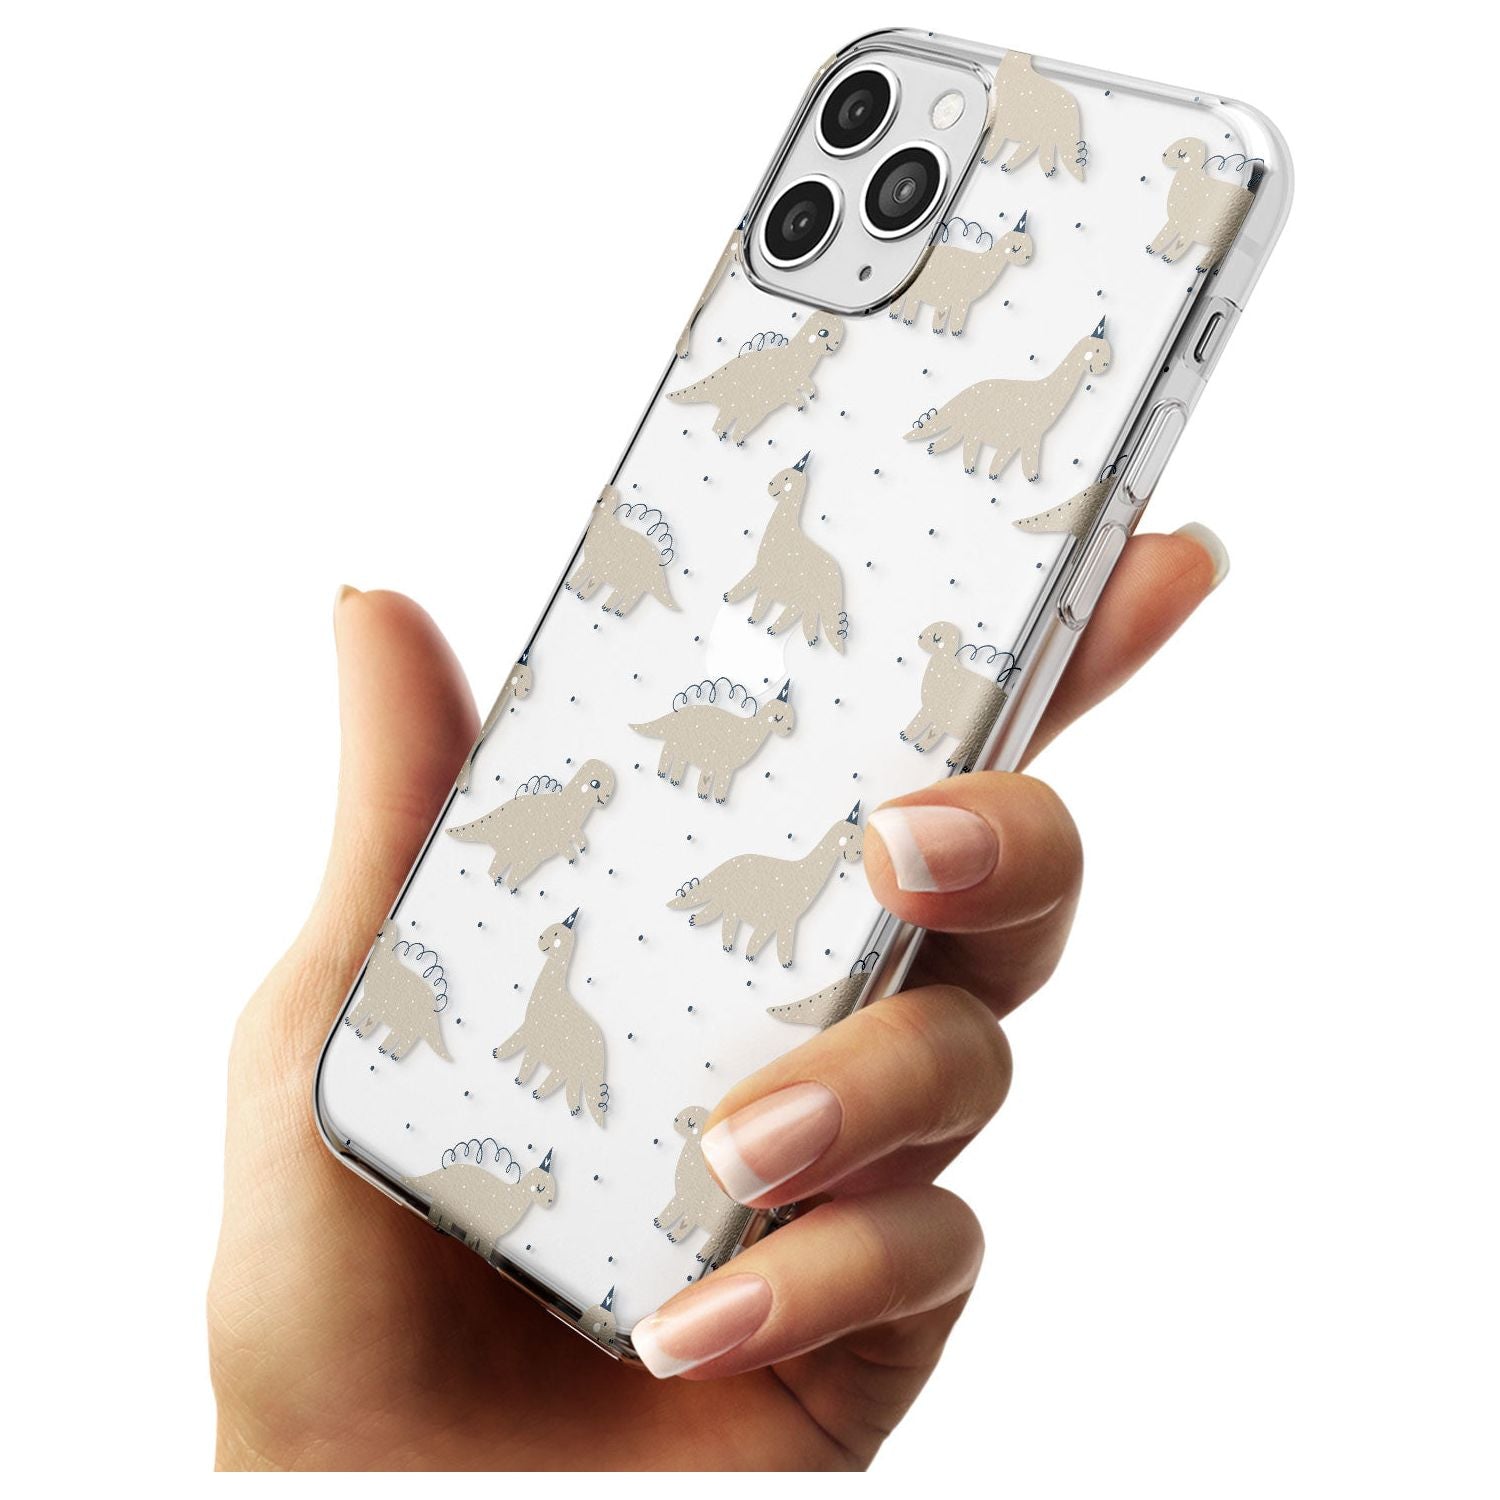 Adorable Dinosaurs Pattern (Clear) Slim TPU Phone Case for iPhone 11 Pro Max